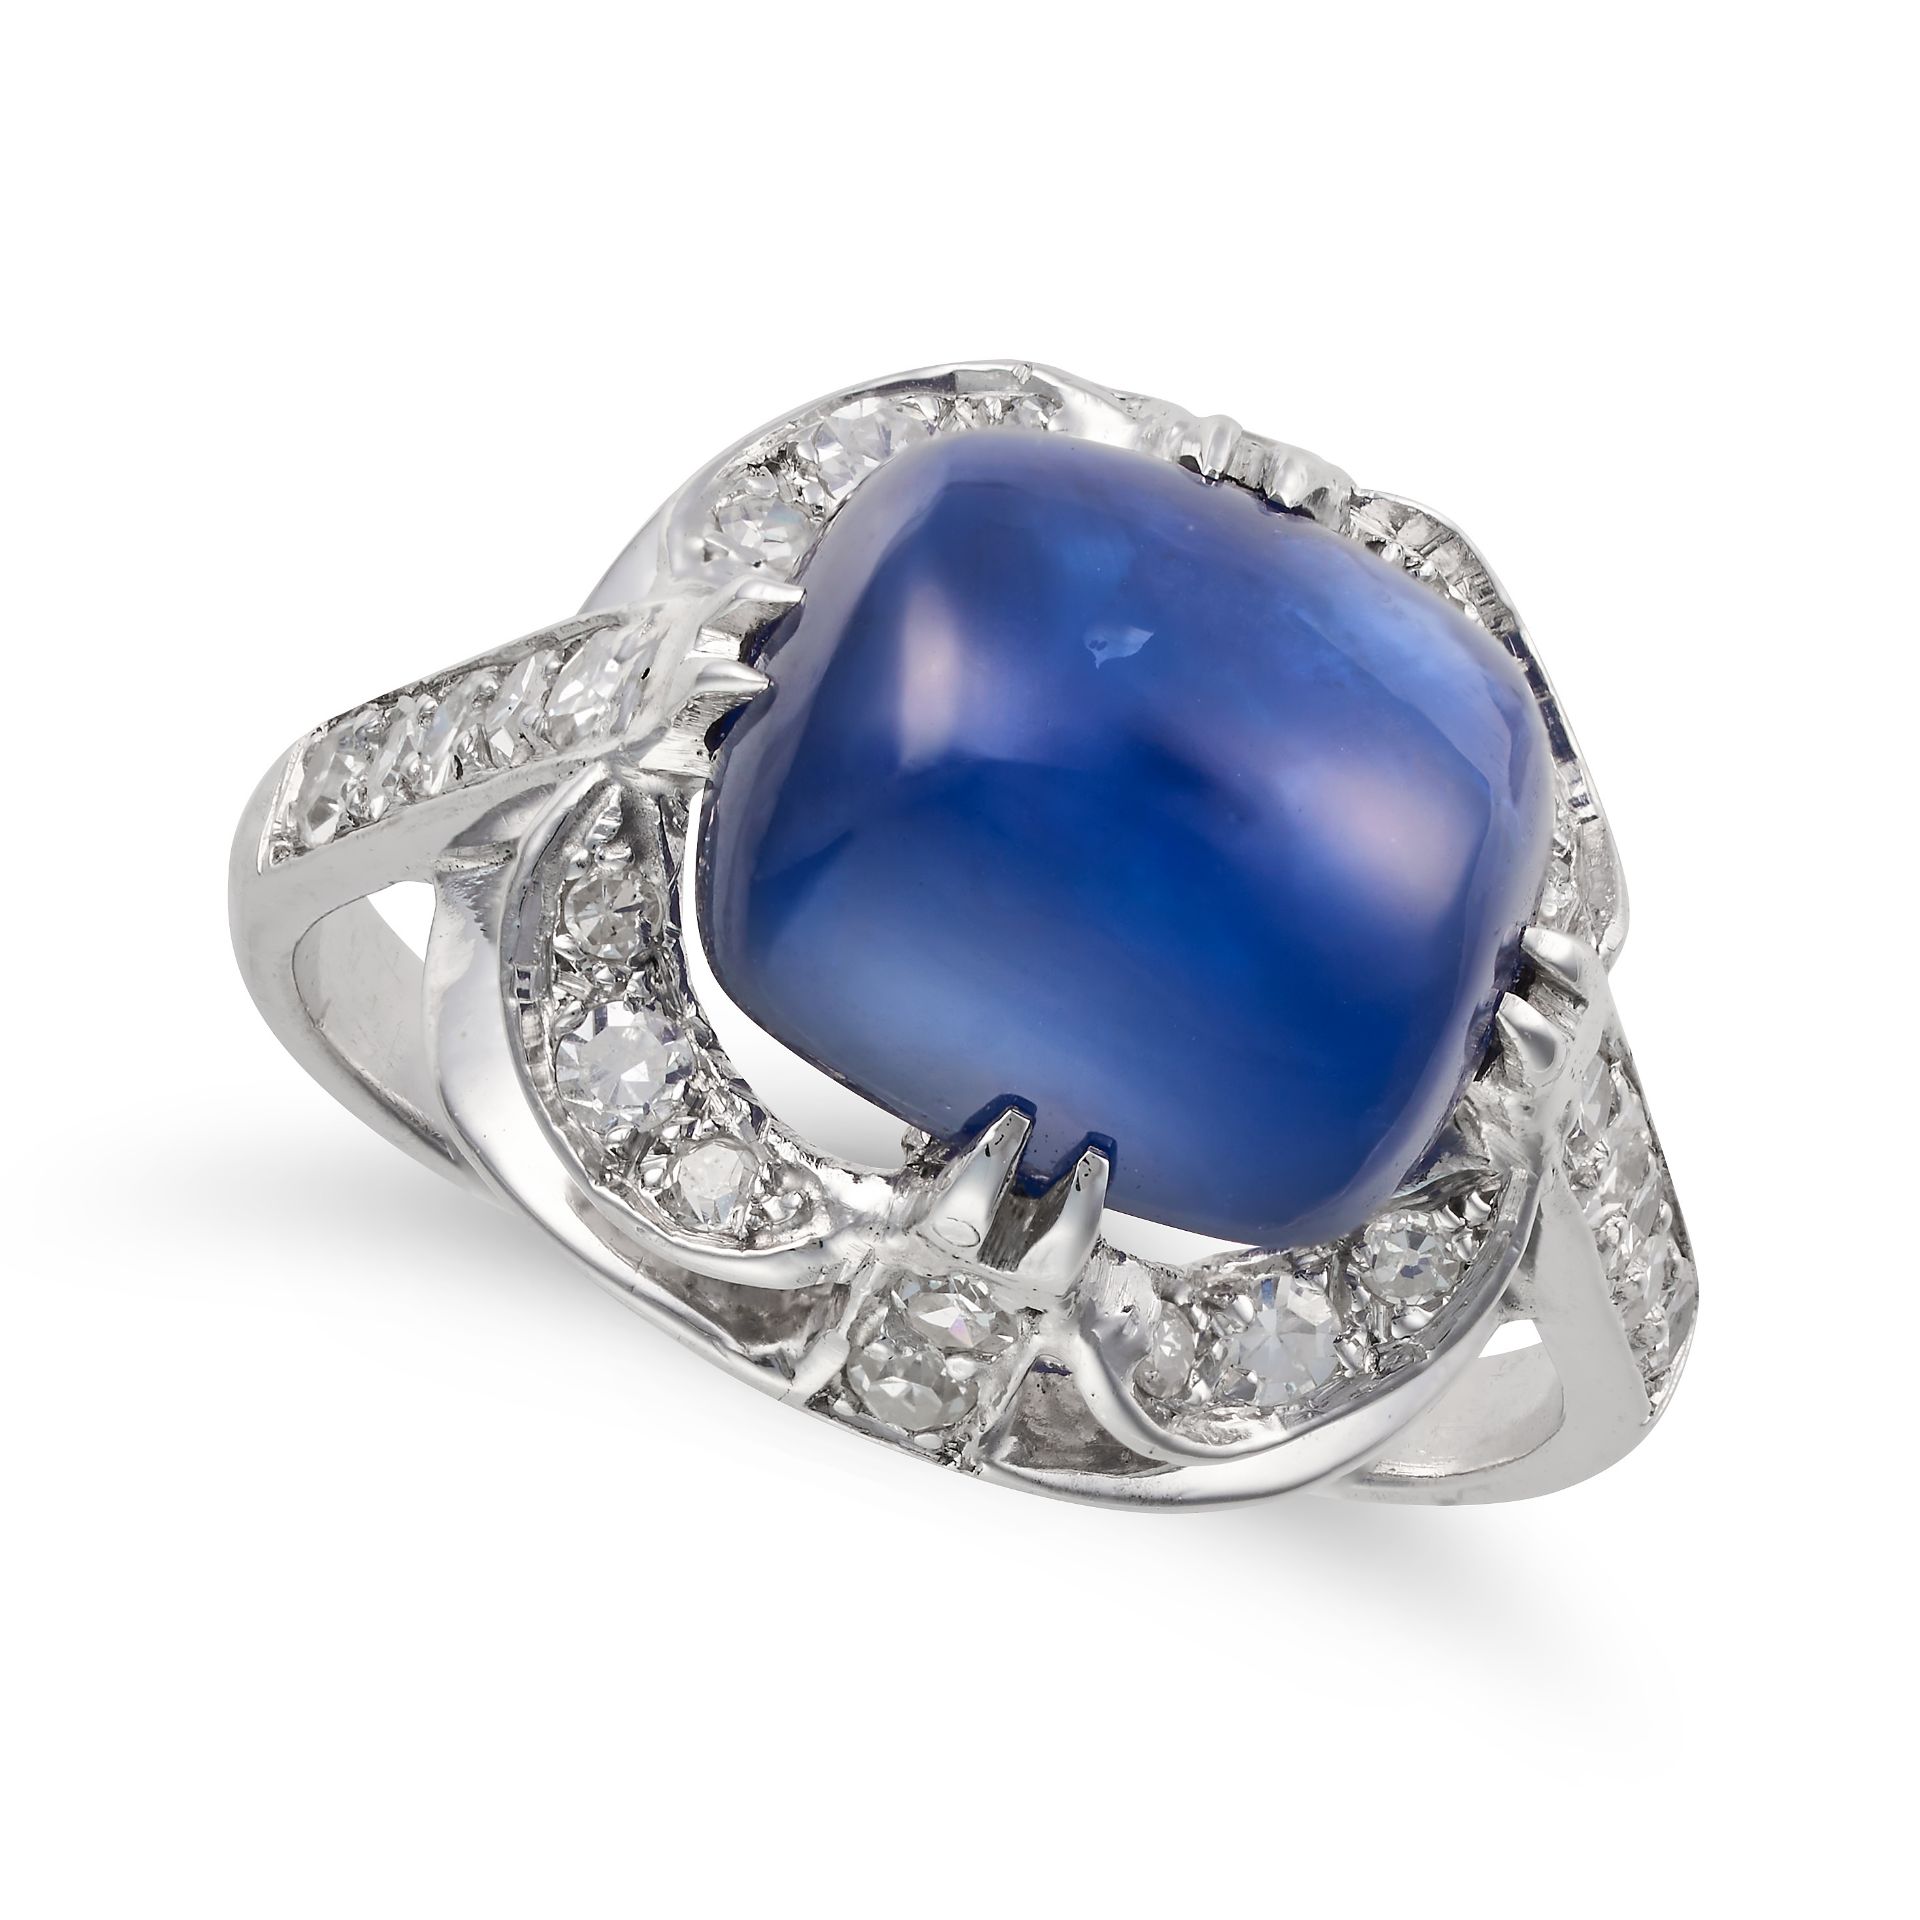 A SAPPHIRE AND DIAMOND RING set with a cabochon sapphire of approximately 8.60 carats, accented b...